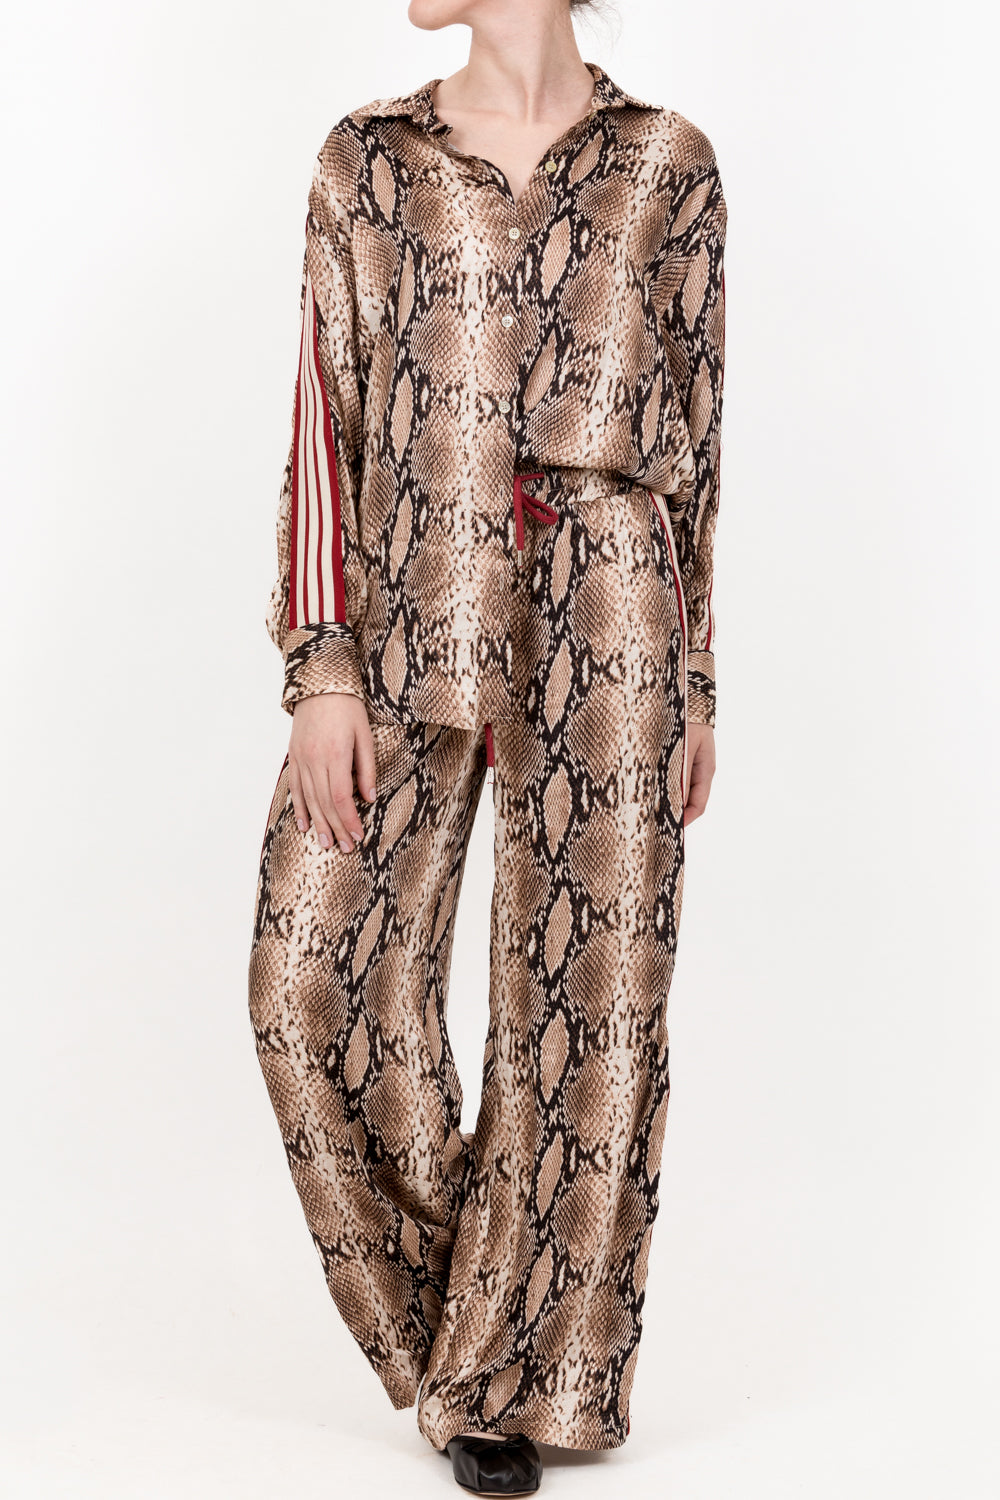 Tensione In - Pantalone animalier con coulisse banda laterale Art. 33634